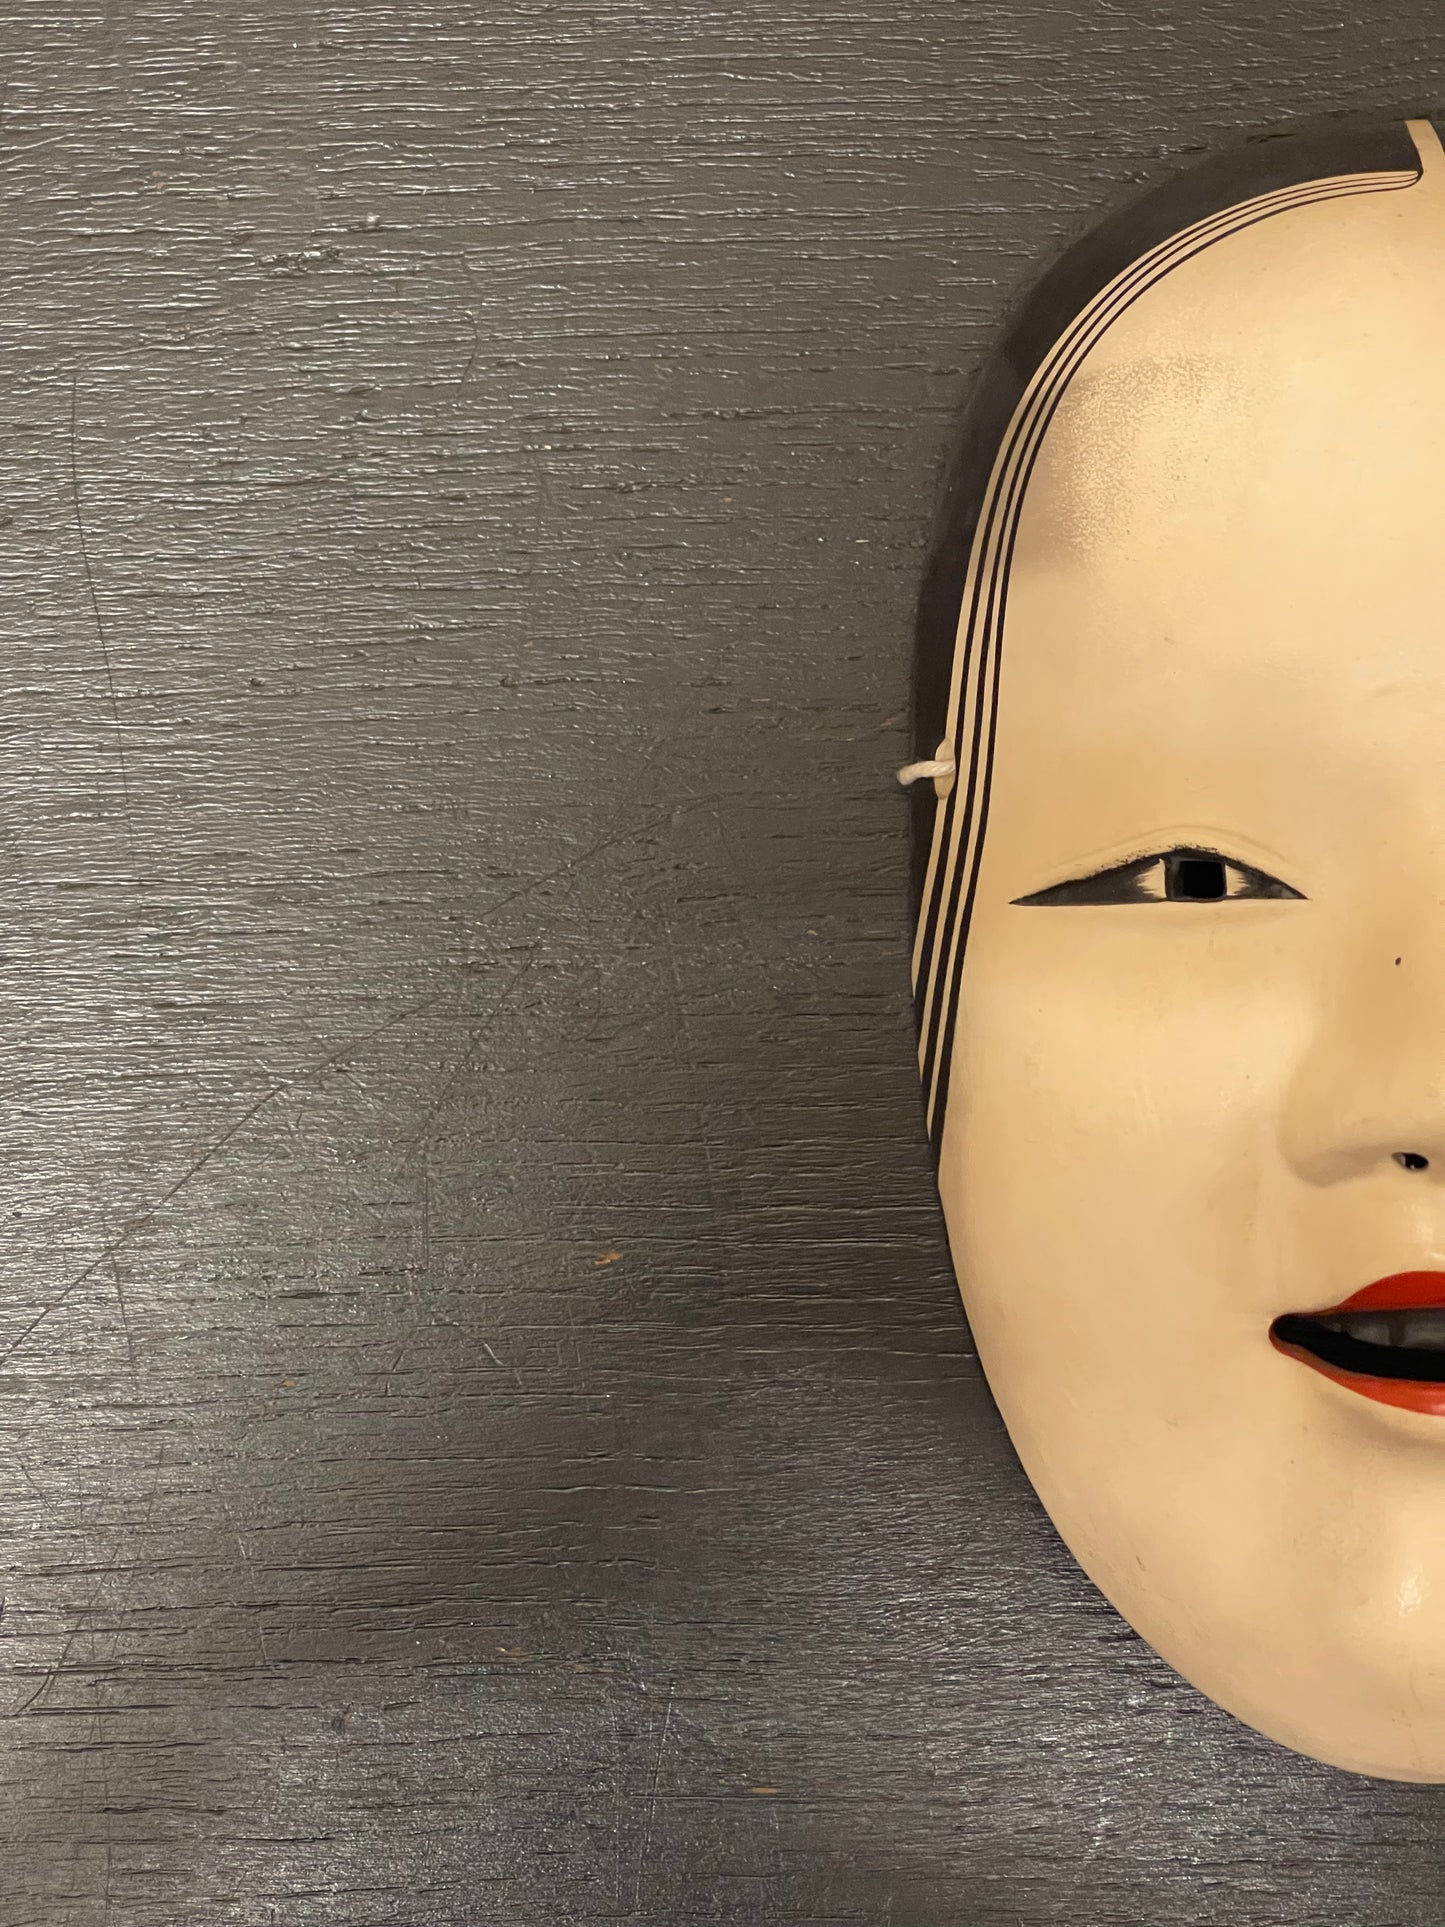 Vintage Japanese Noh Mask Of A Young Woman ( Waka-onna ) By Suzuki Nohin